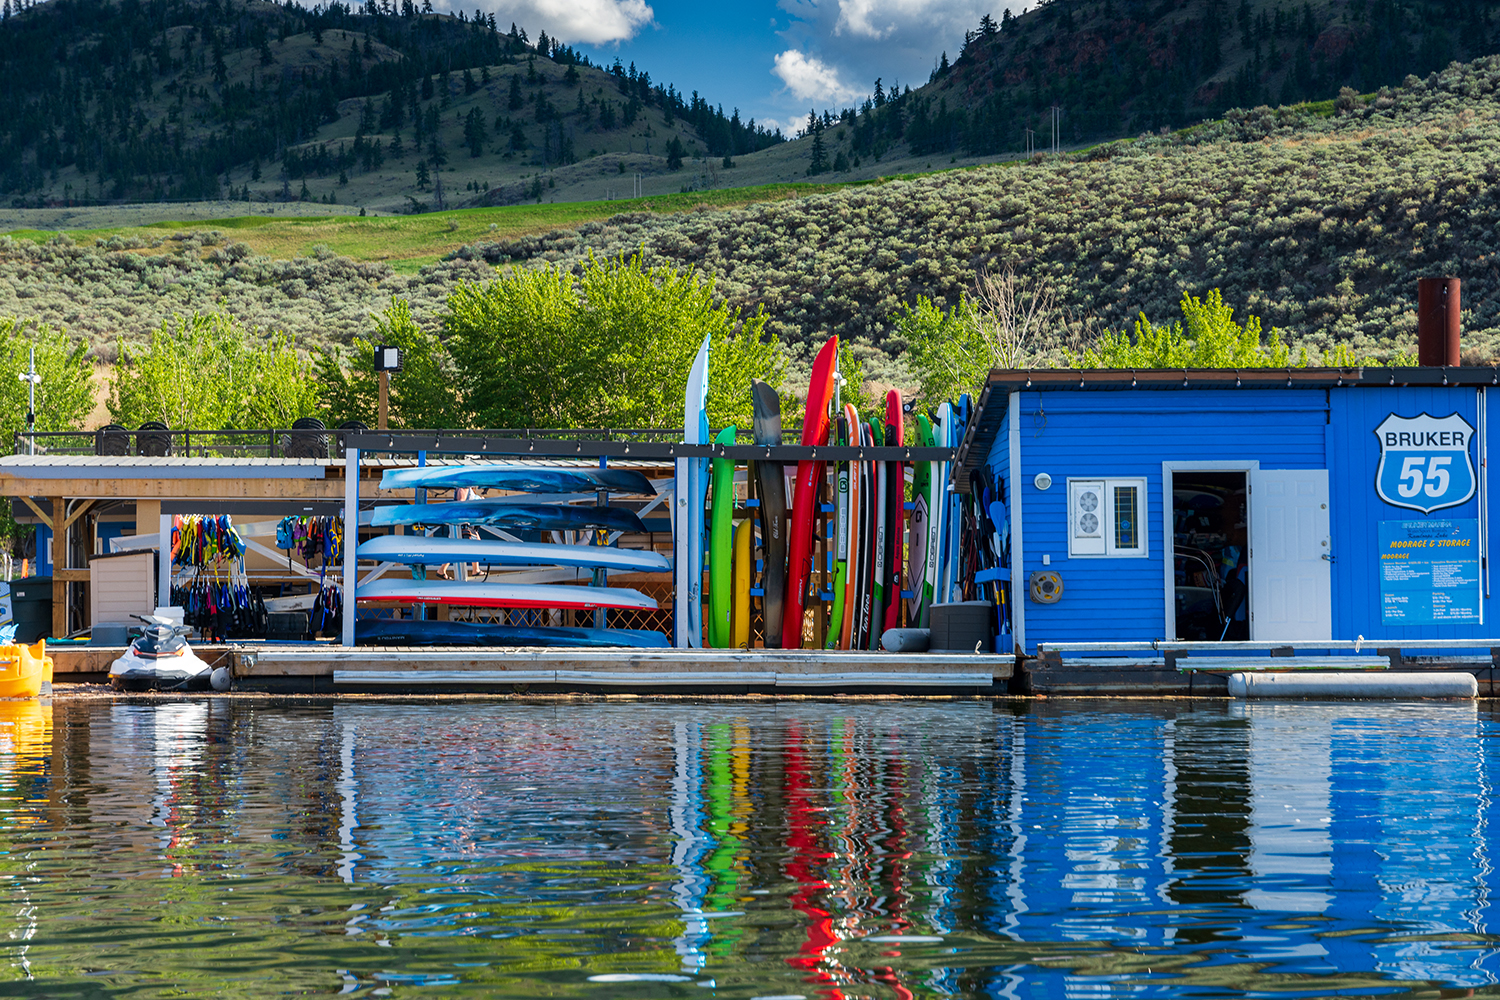 Kamloops Other boathouse with boats and jet skis on the water with a mountain